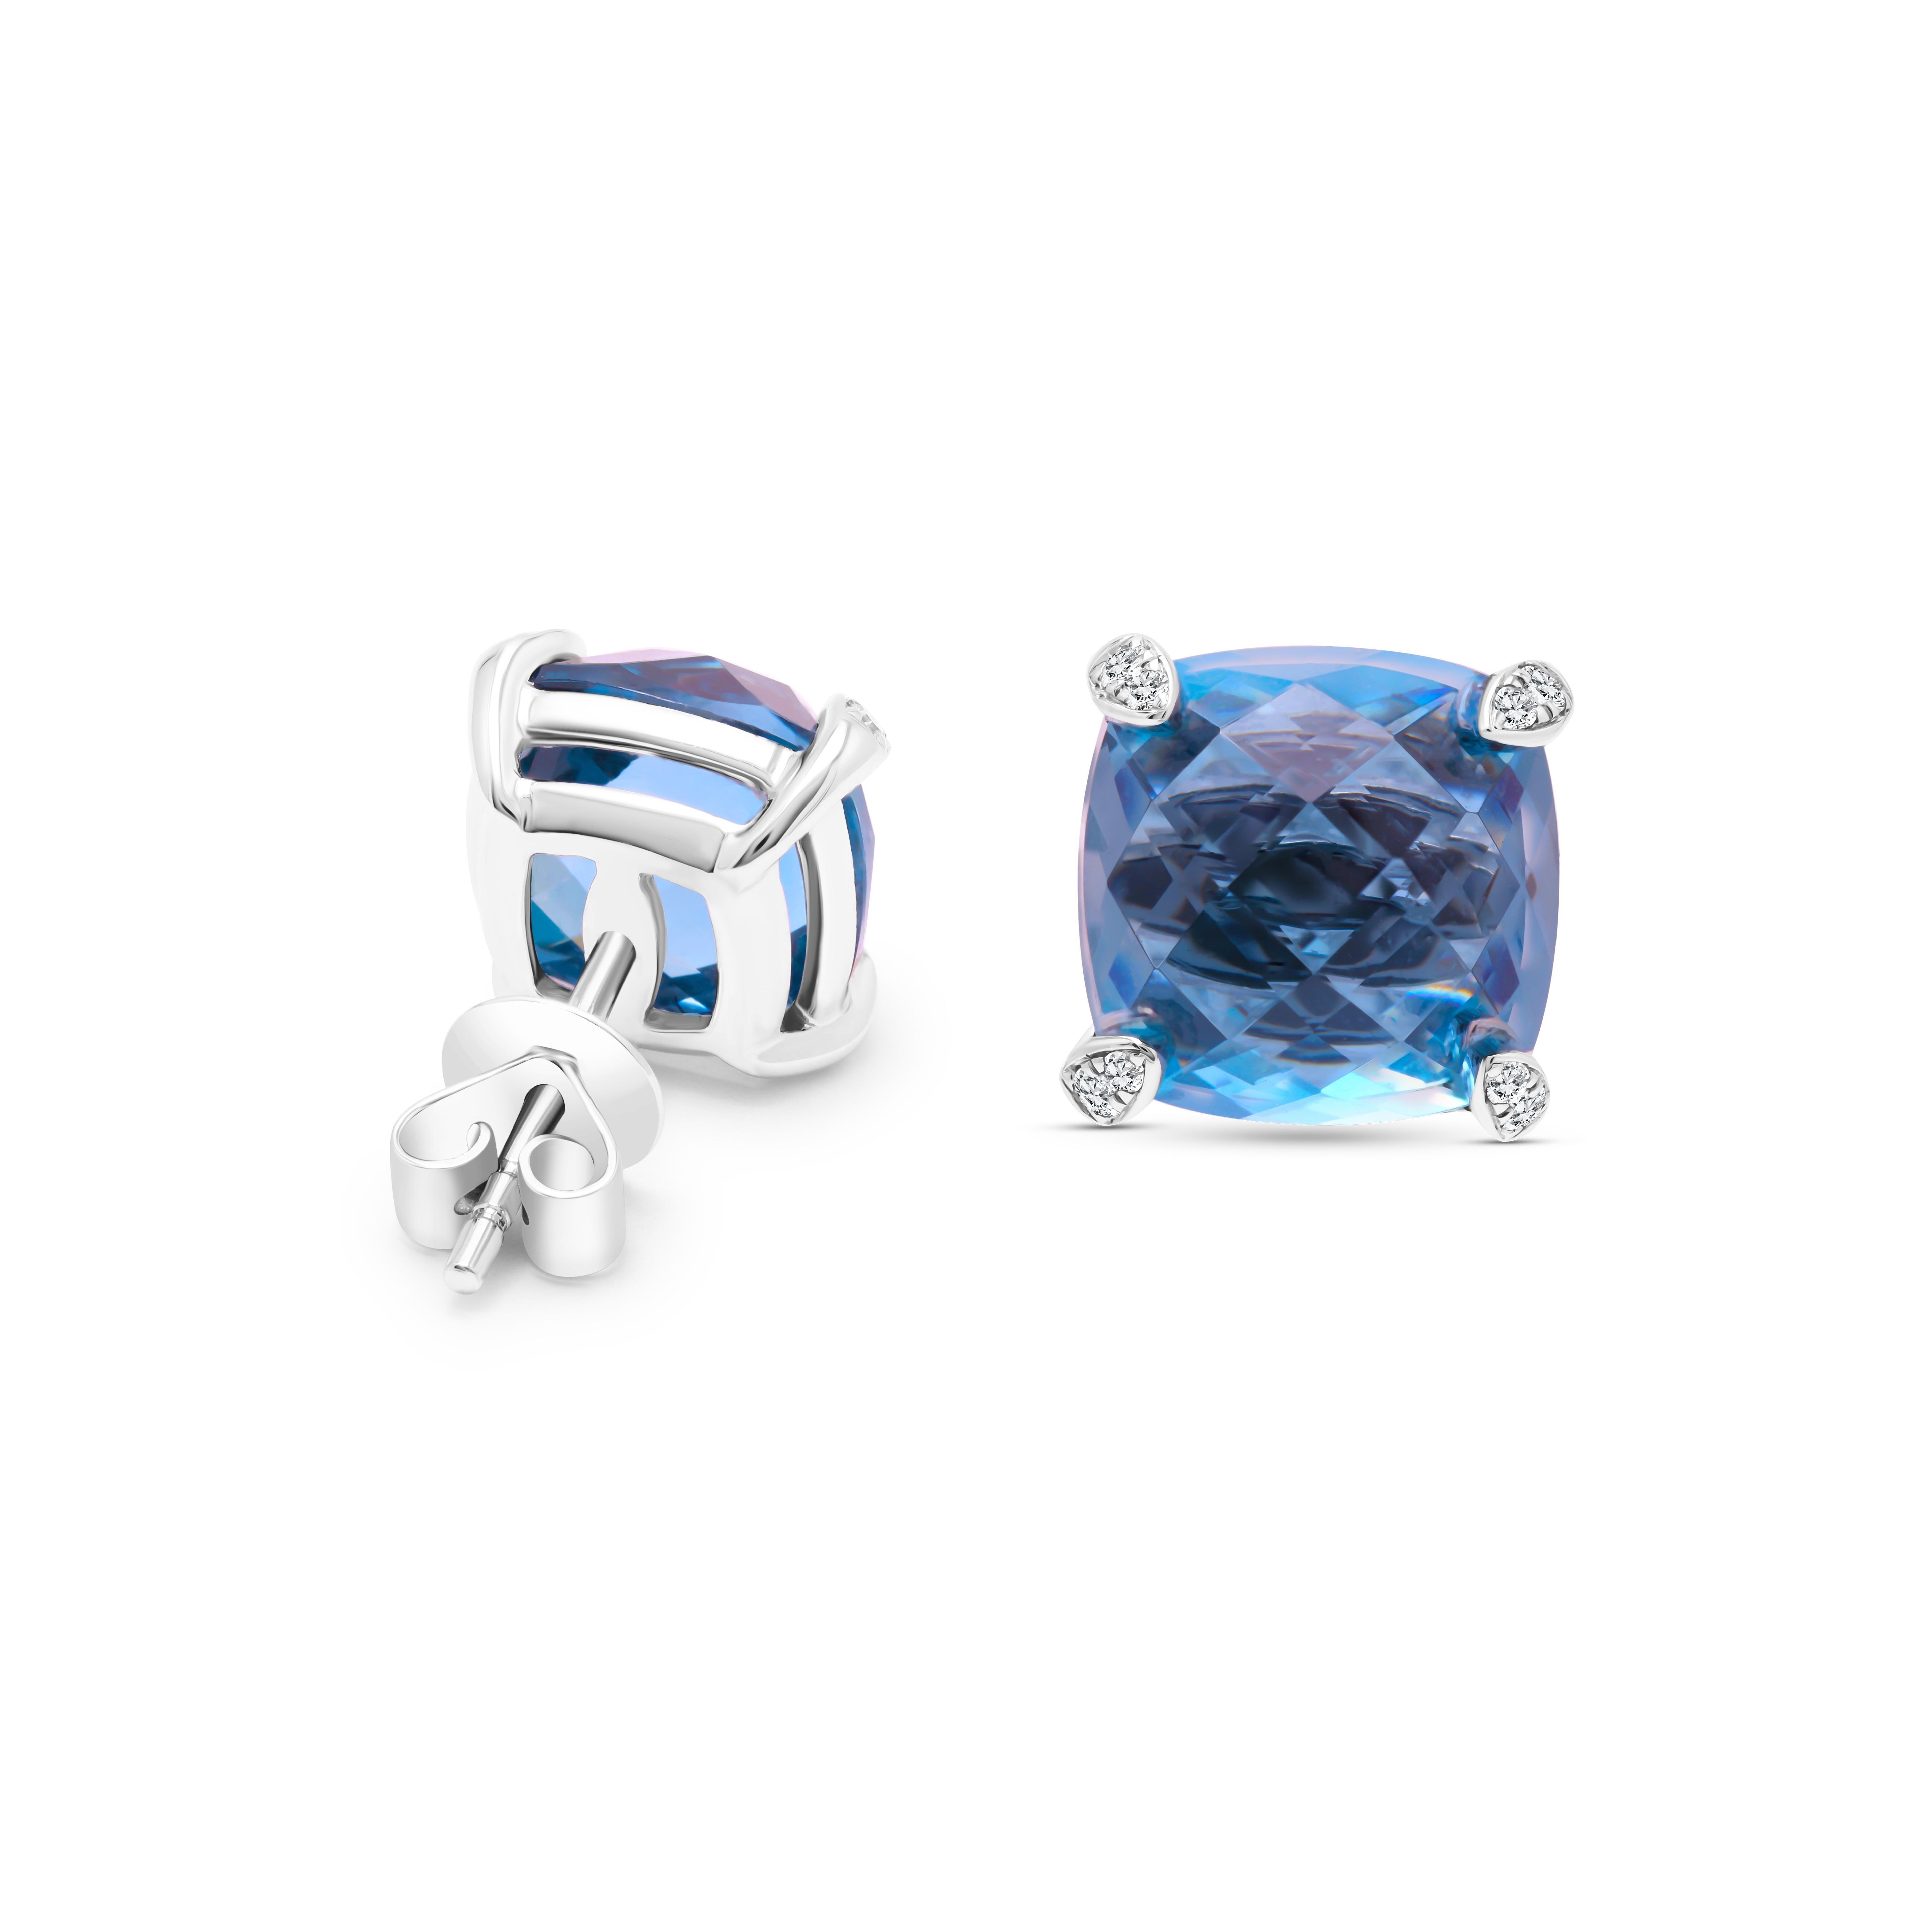 Experience the allure of luxury and sophistication with these enchanting earrings. Adorned with a magnificent 7.92 carats of cushion-cut blue topaz, they exude a captivating, deep blue elegance that's truly mesmerizing. The prongs, embellished with